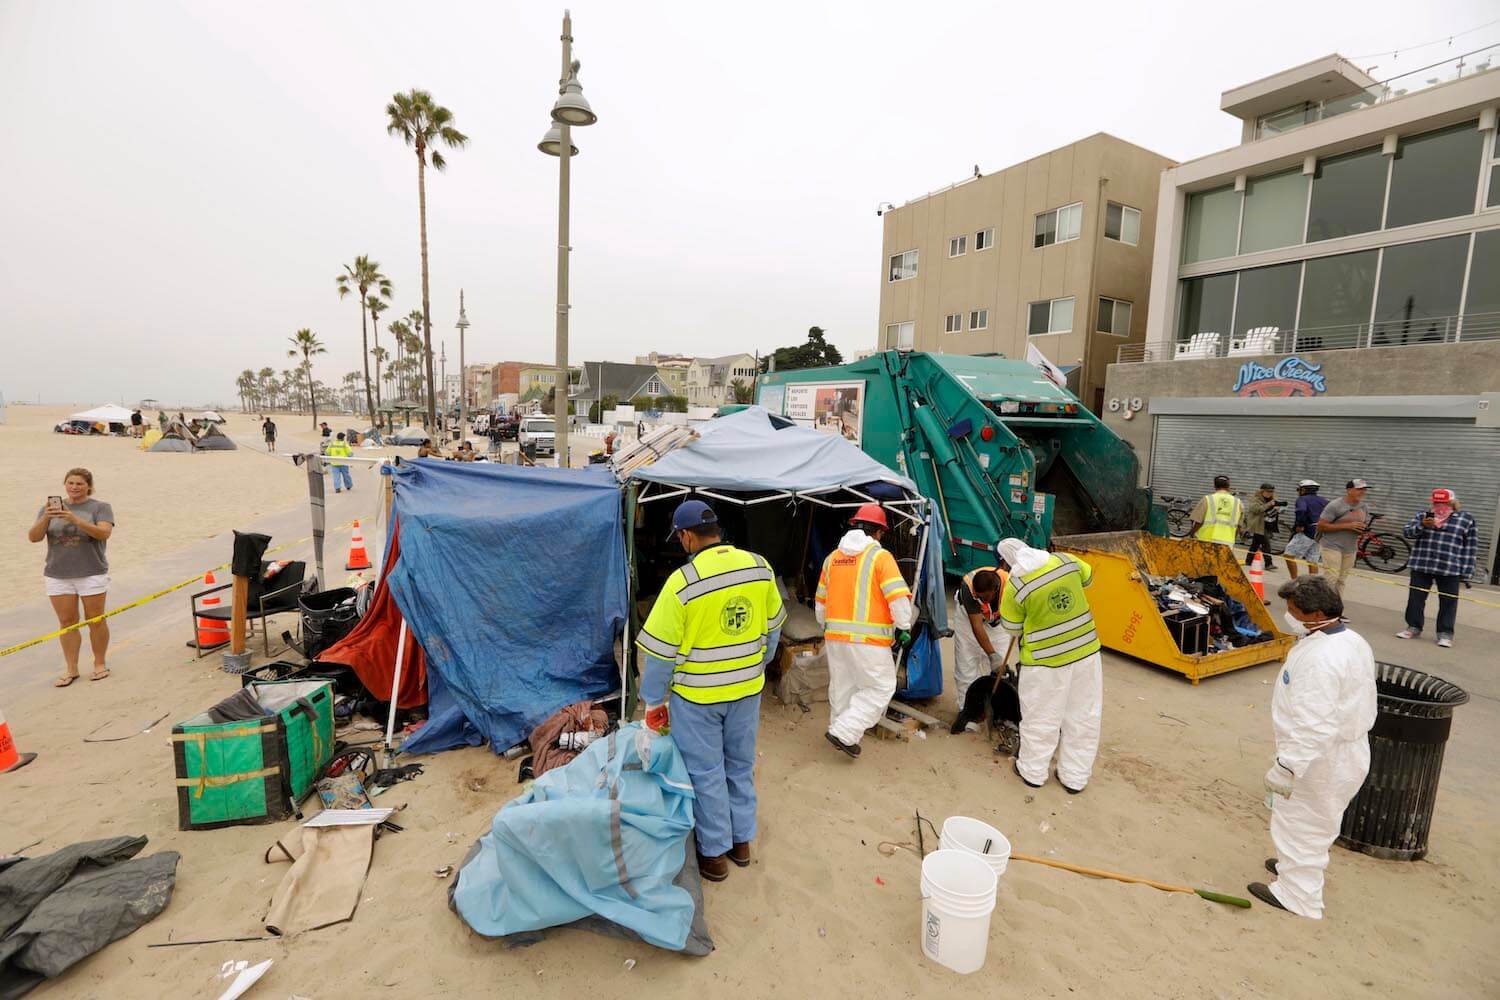 City of Los Angeles sanitation workers clear a homeless encampment along Ocean Front Walk in Venice on July 30, 2021.